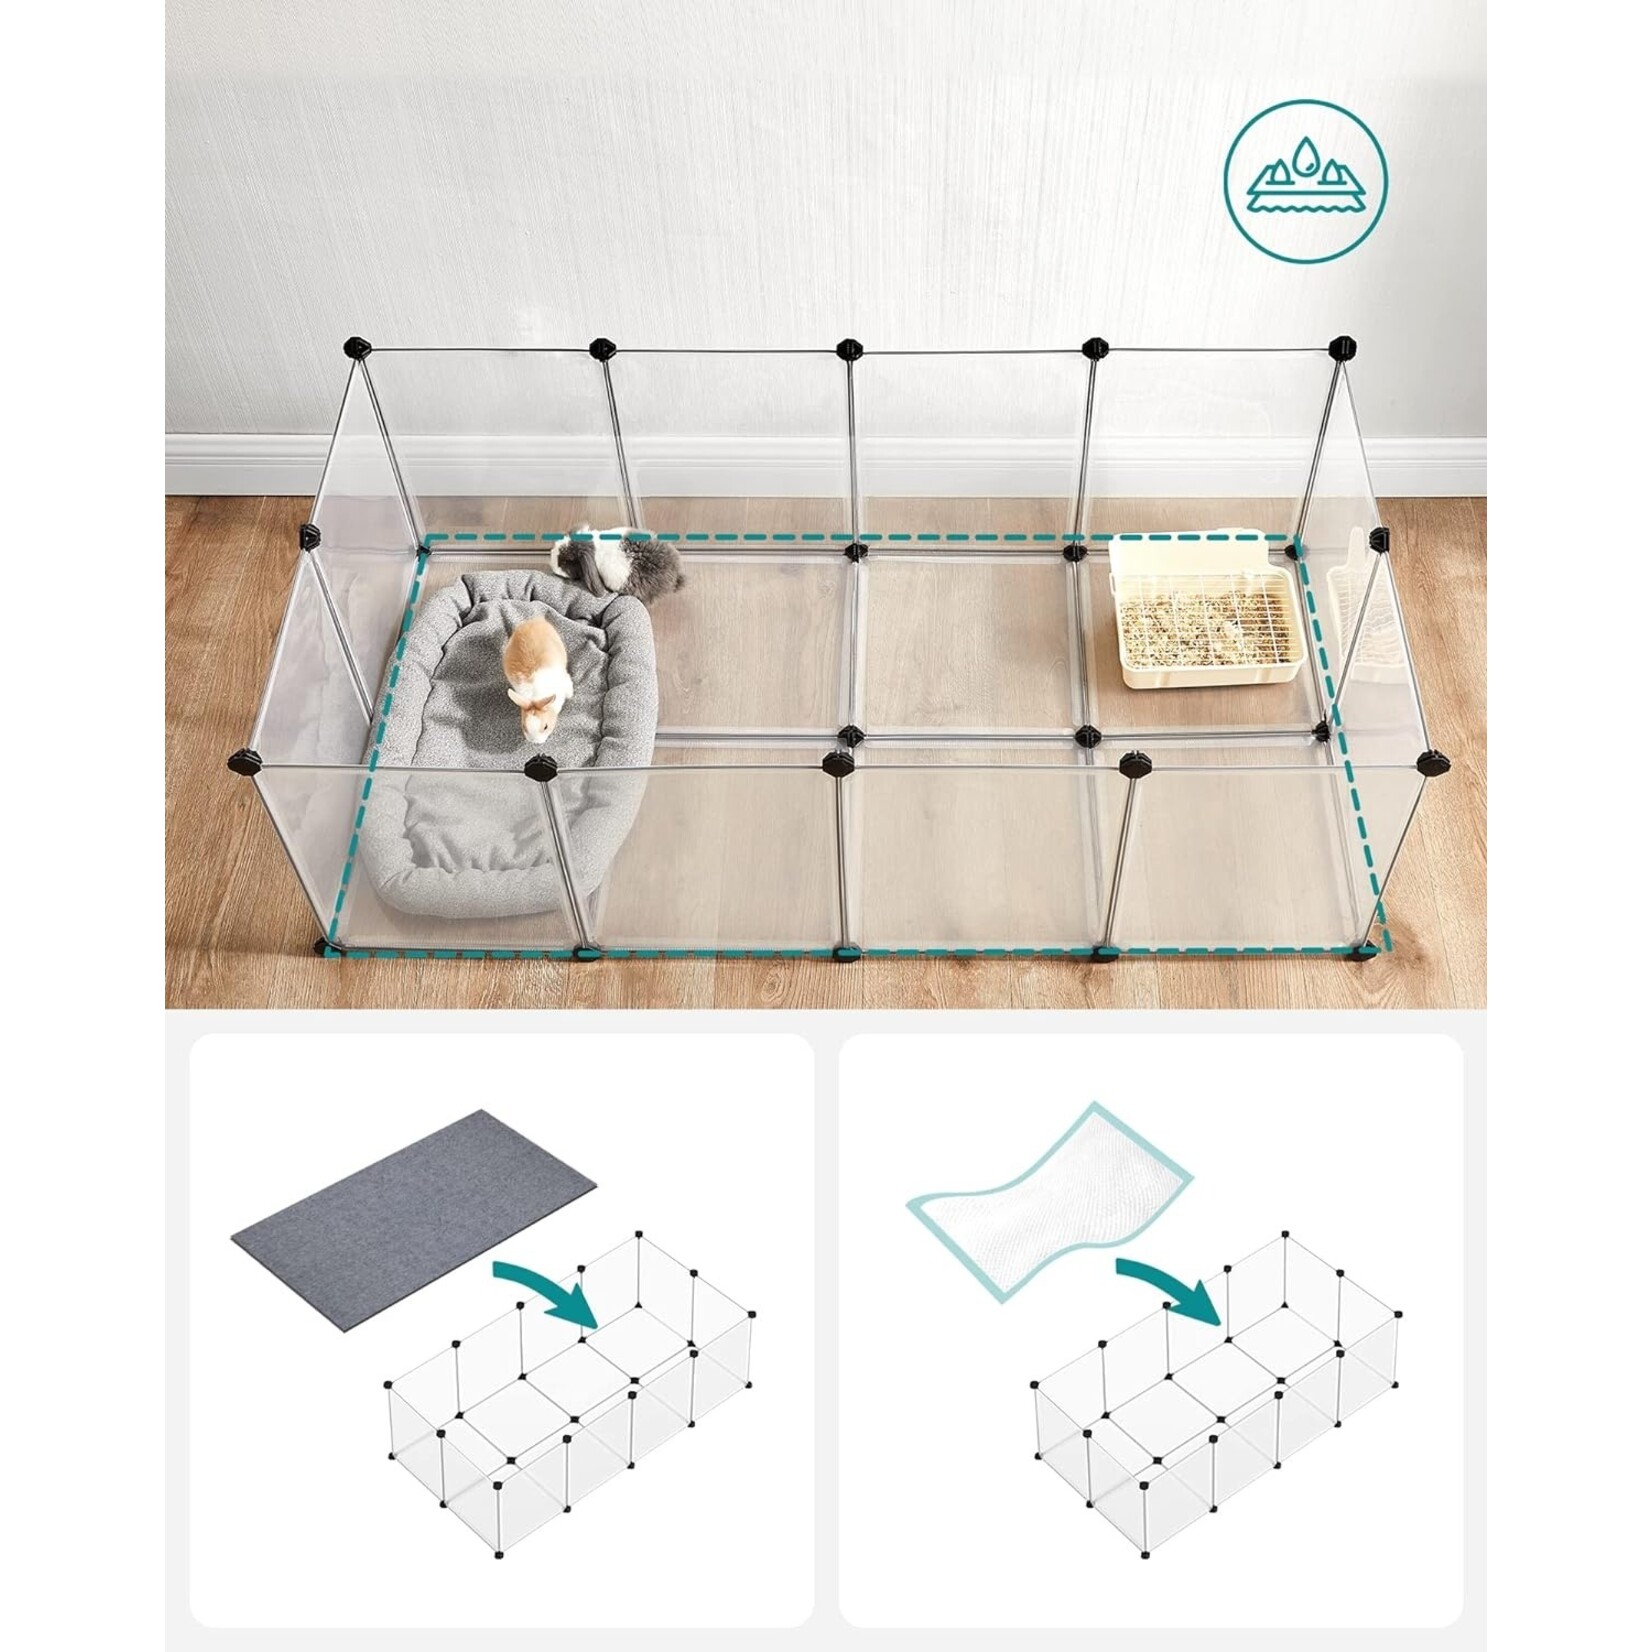 Bobbel Home Dok Pets - Pet Cage - Incl Bottom - 20 panels - For small animals